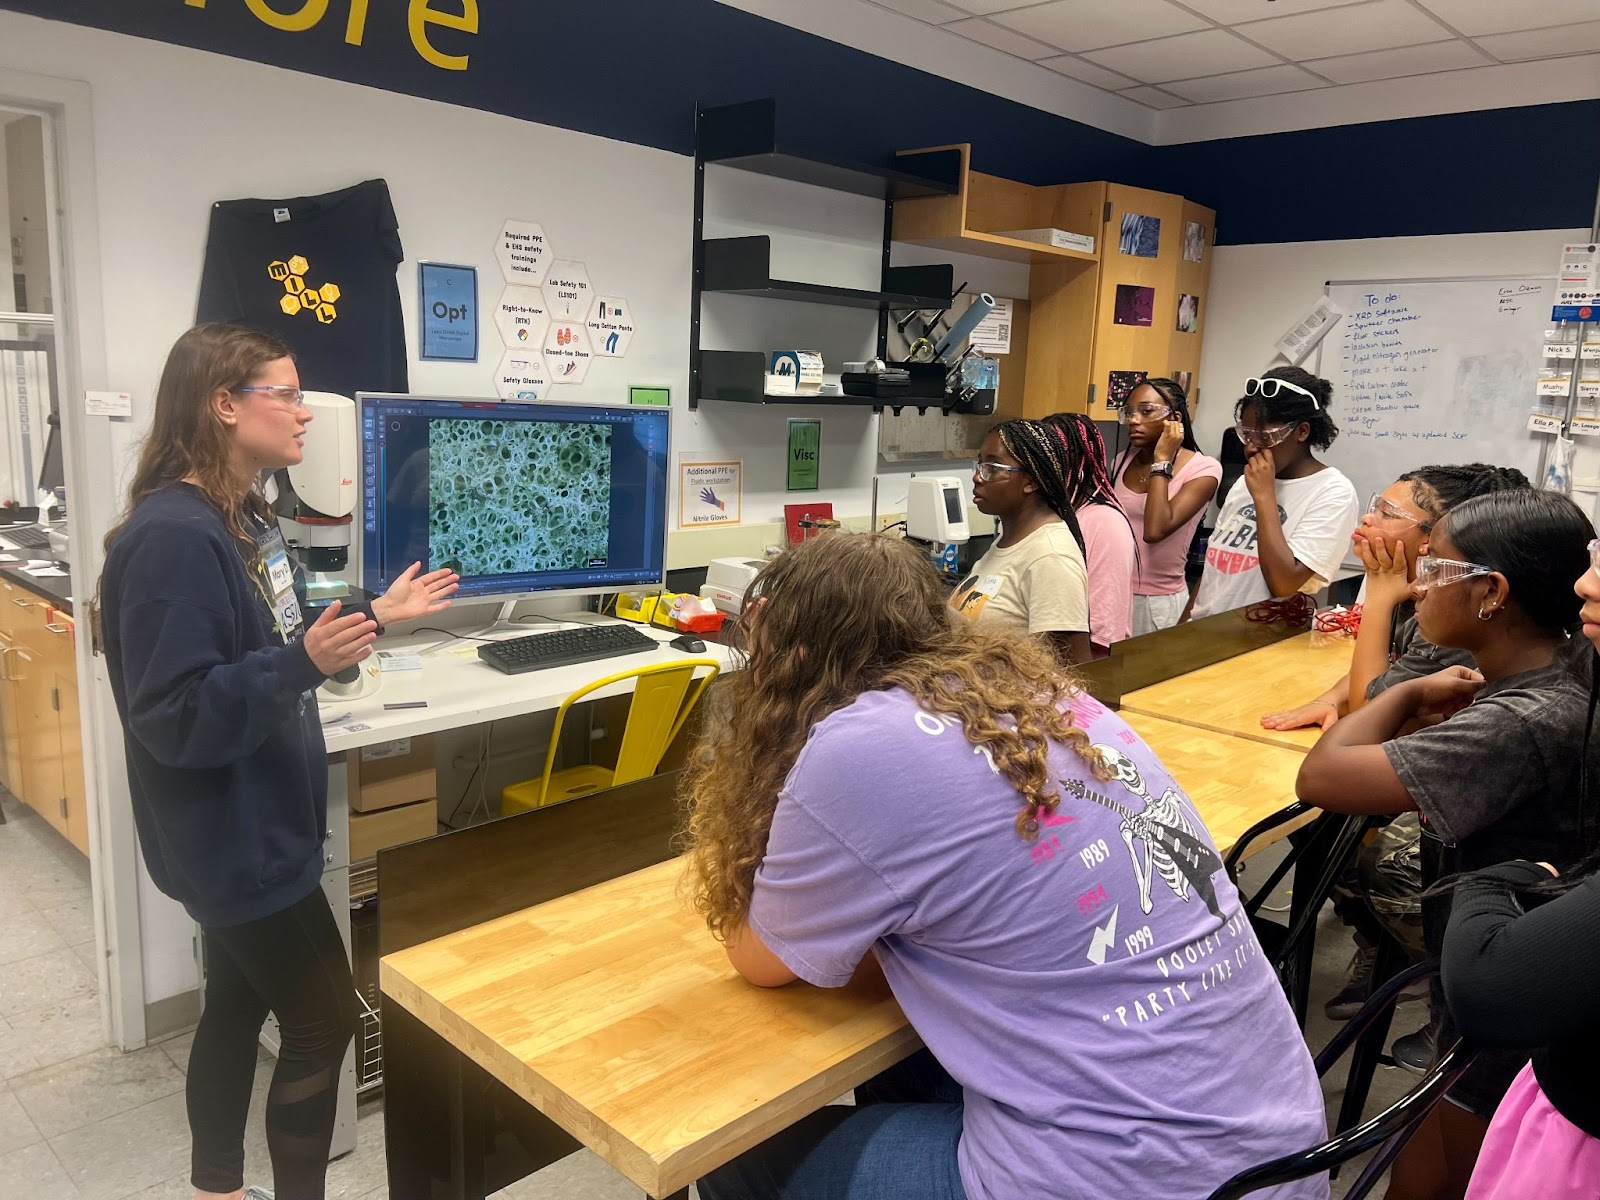 Mary demonstrating the Leica Optical Microscope and SEM during STEM Gems tour